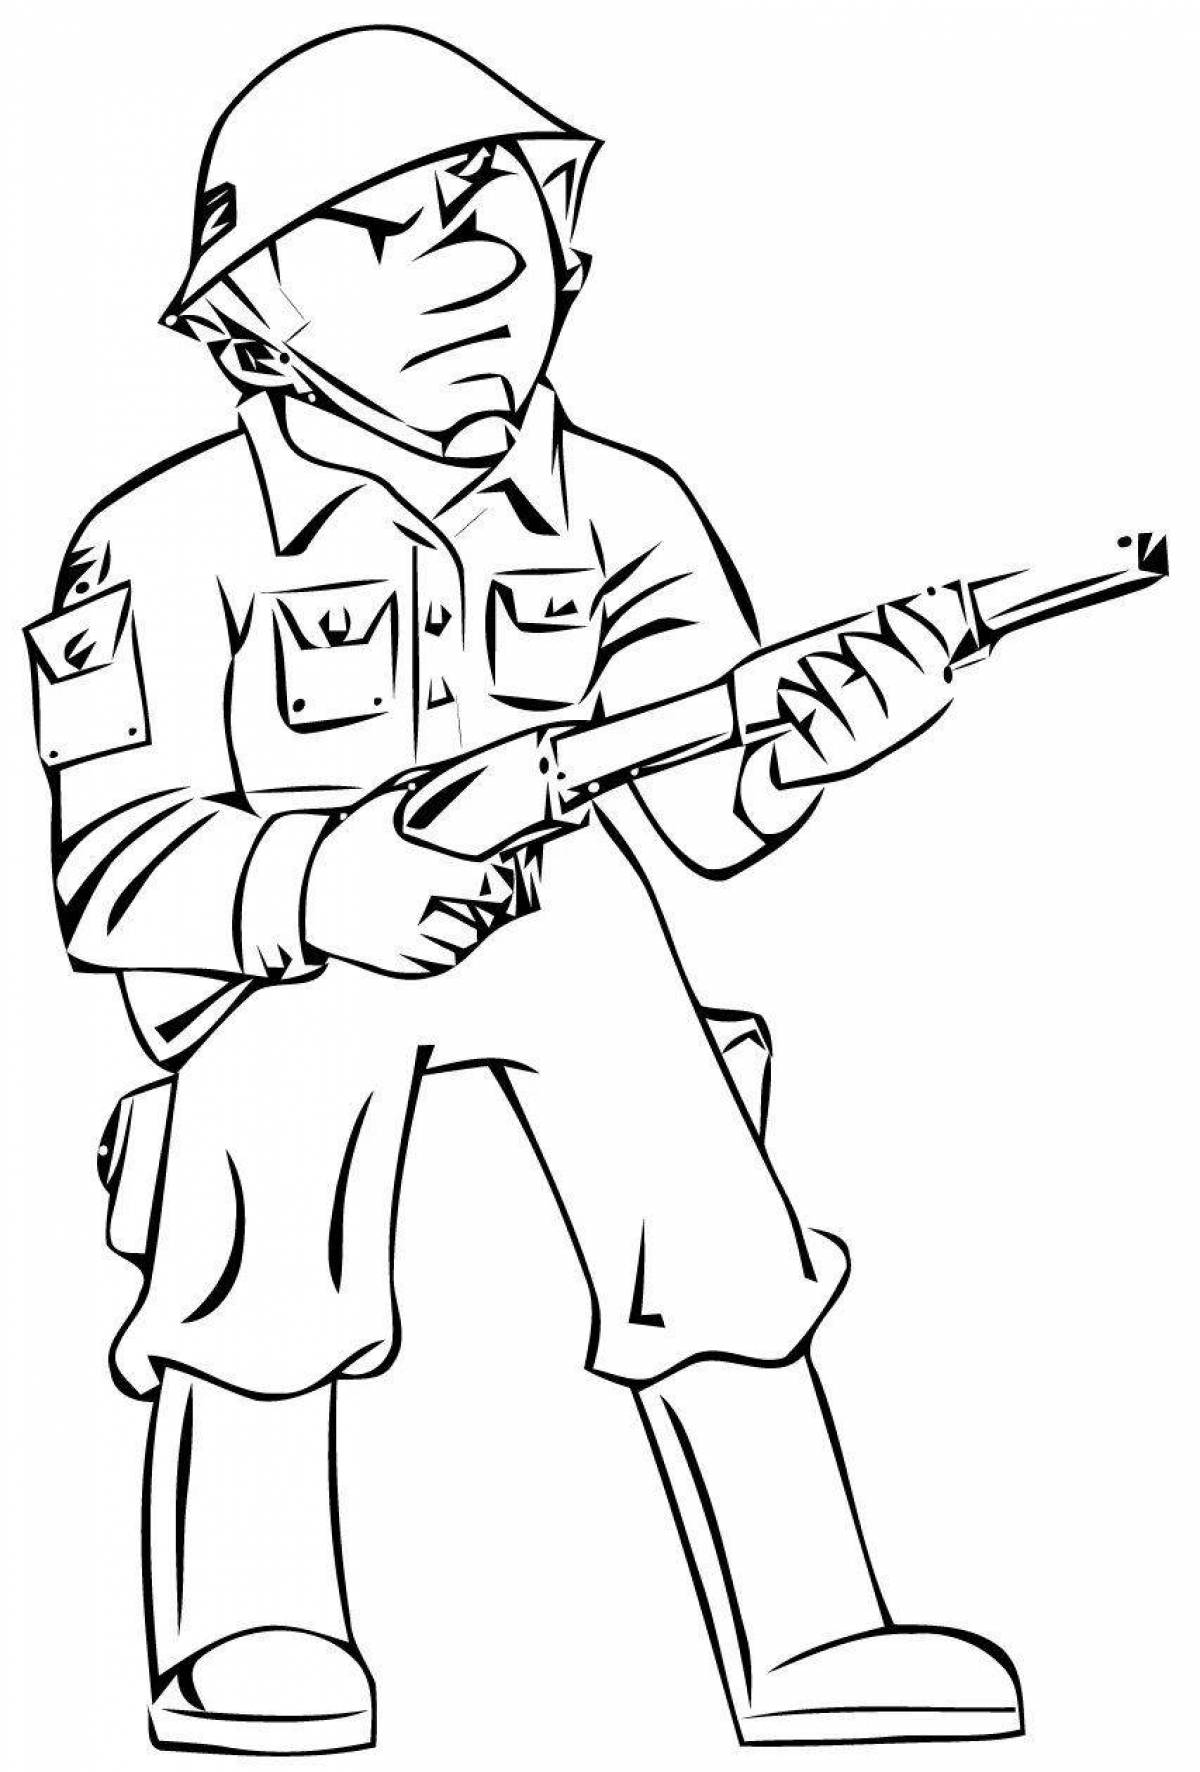 Colourful coloring pages soldiers for children